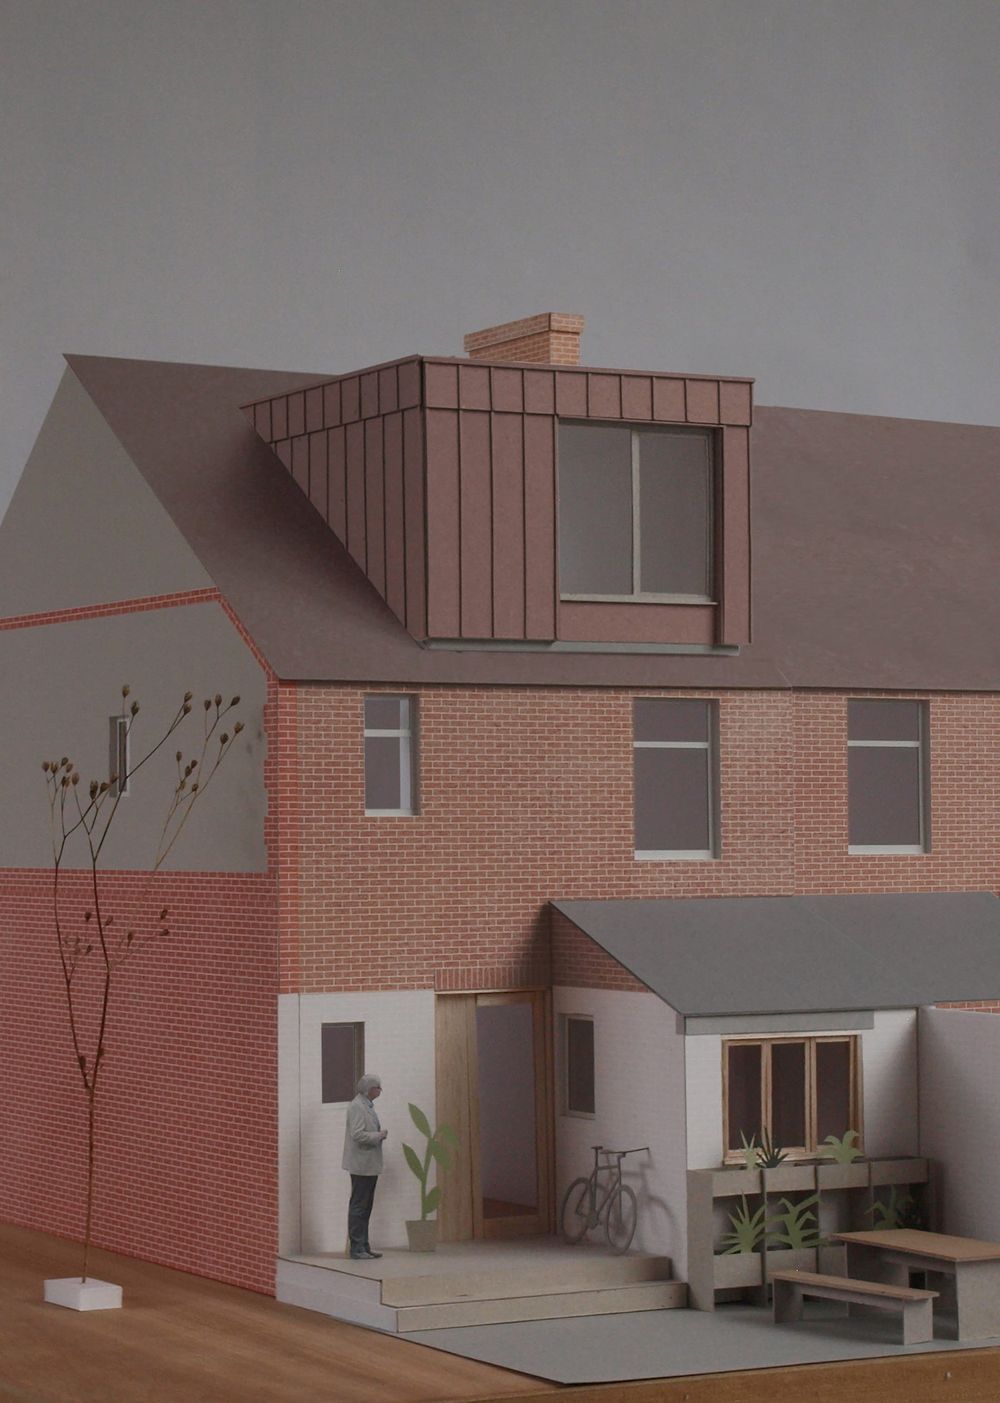 External view of the scale model of the proposed dormer extension and refurbishment for the Whalley Road project designed by From Works.